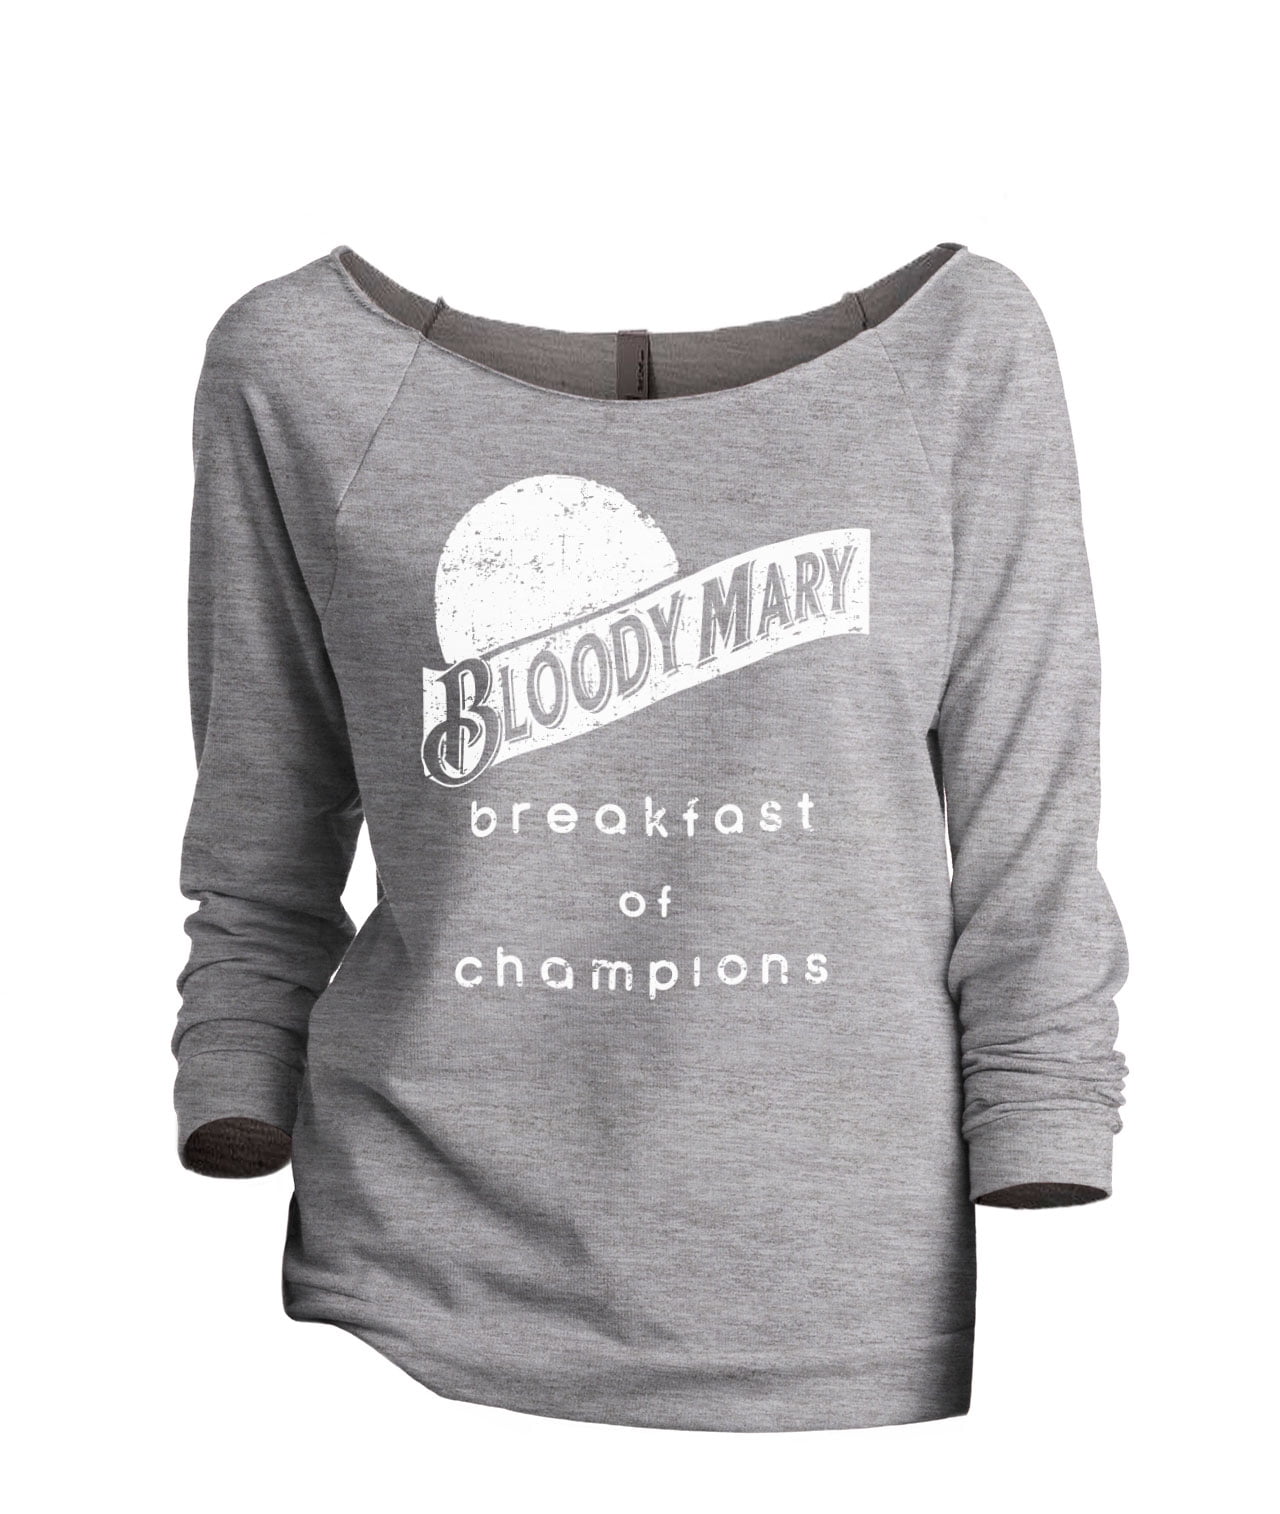 Bloody Mary Breakfast of Champions or Champagne Breakfast of Champions T-Shirt 